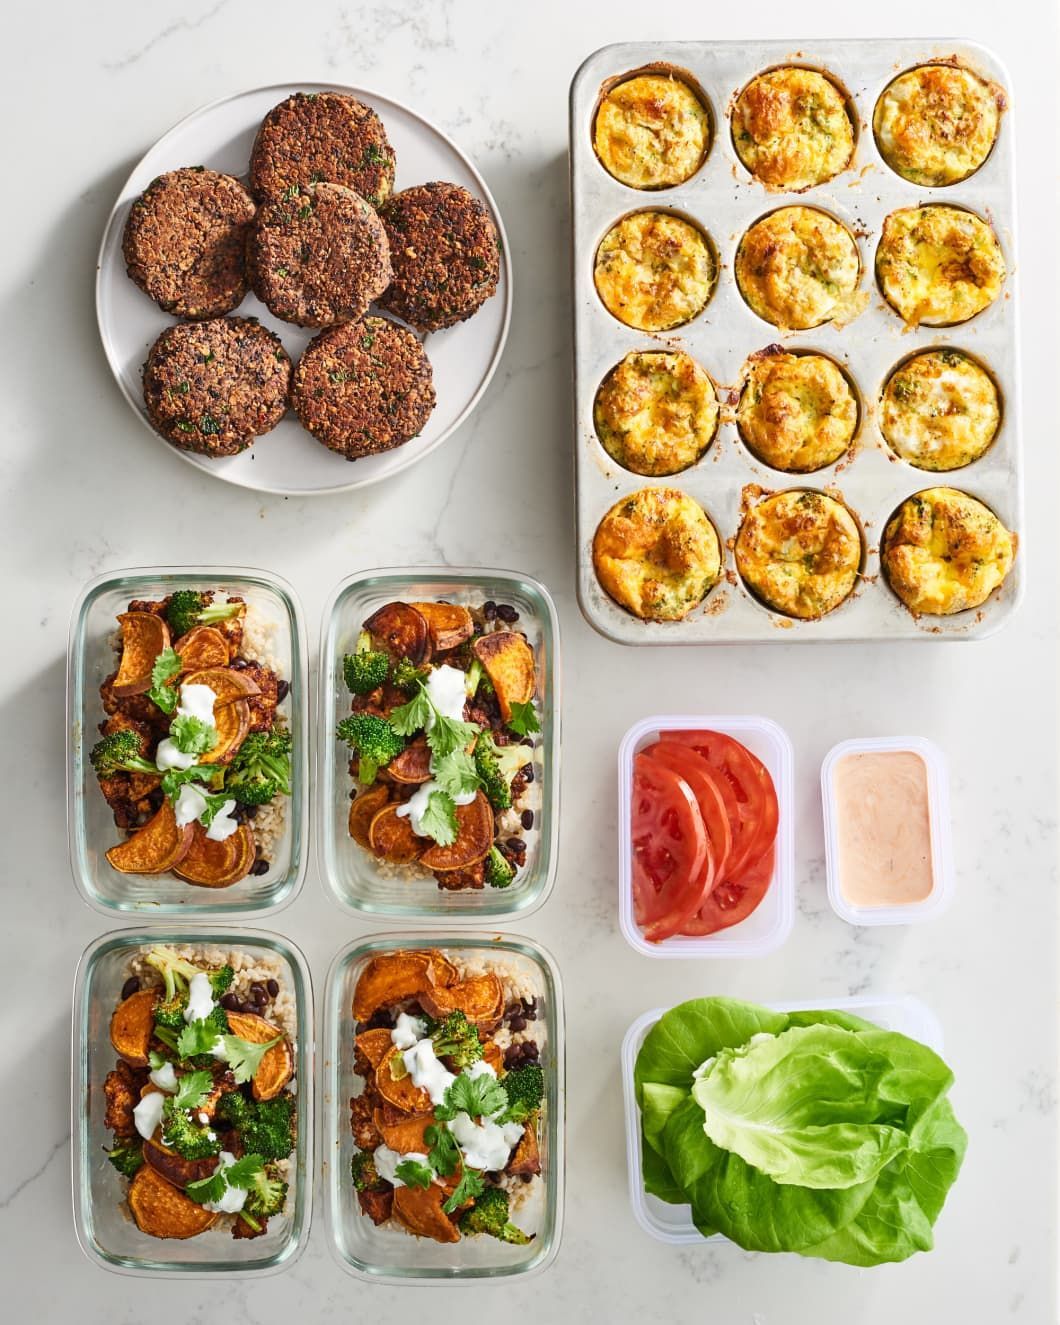 Meal Prep Plan: How I Prep a Week of High-Protein Vegetarian Meals In Just 2 Hours - Meal Prep Plan: How I Prep a Week of High-Protein Vegetarian Meals In Just 2 Hours -   18 meal prep recipes vegetarian fitness ideas